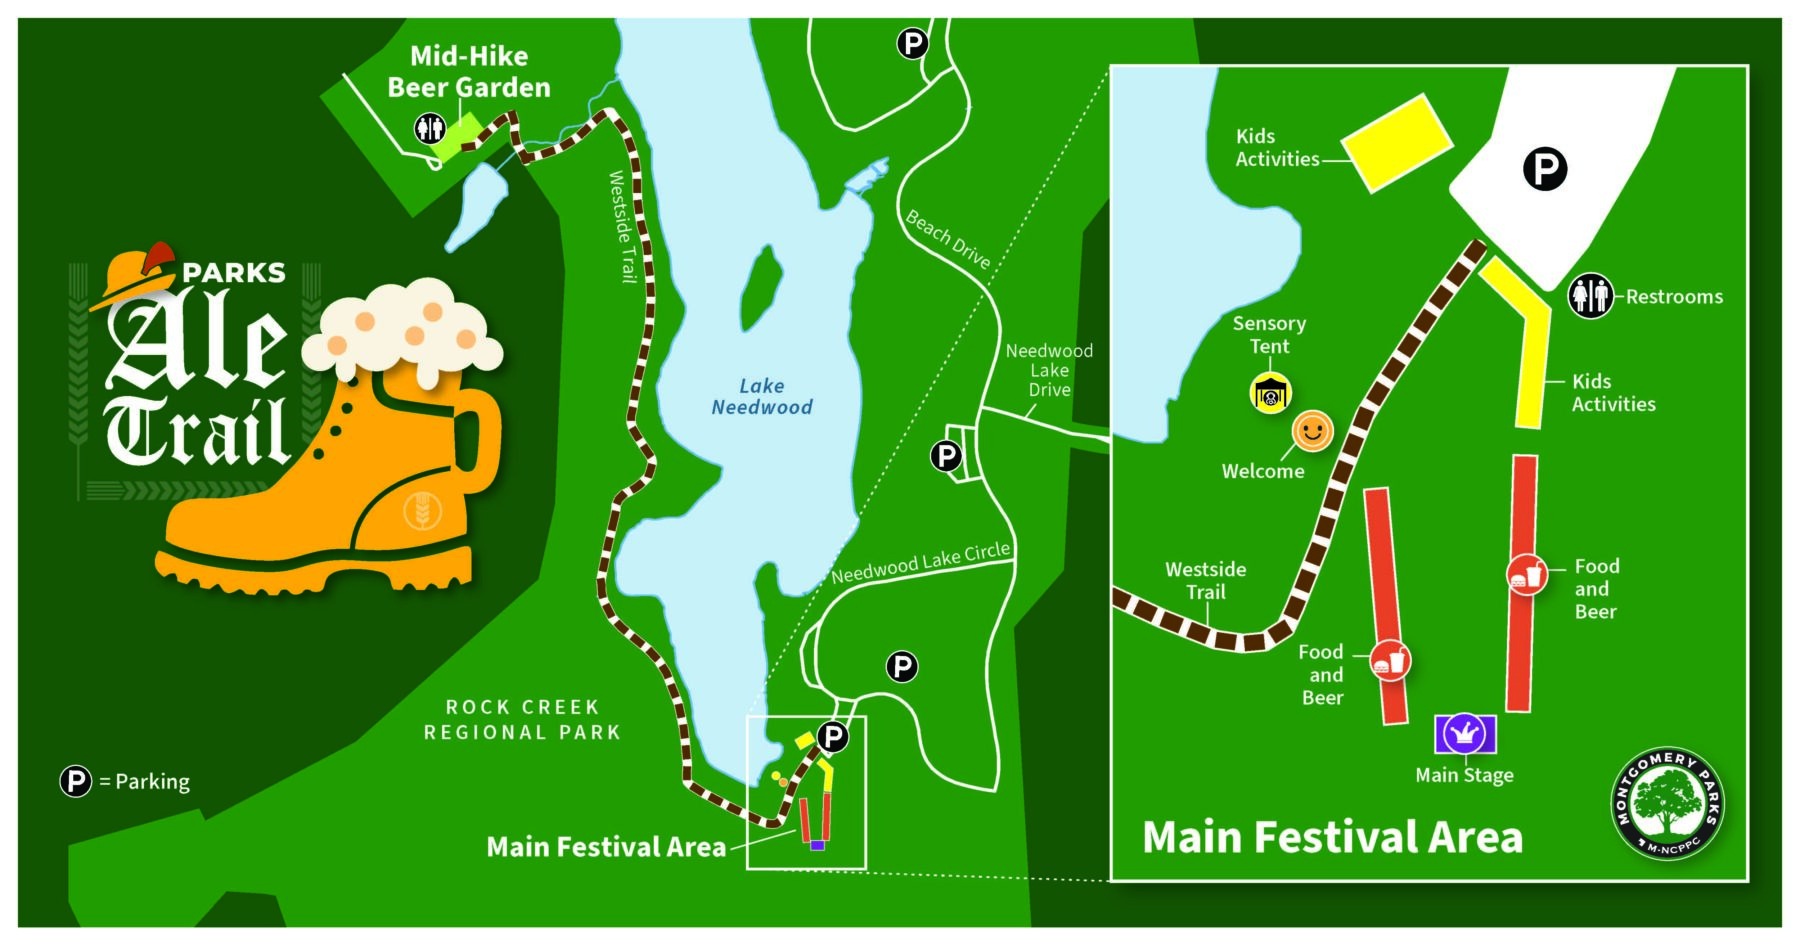 Image shows Ale Trail Parks map view with main festival area, parking places, lake needwood, Mis-hike beer garden, Westside trail, Beach drive, Needwood lake drive, Needwood lake circle, while on the other side a zoom view of Main festival area of Ale Trail Park with location markings of Main stage, Food & Beer parties stage, Kid Activities, Restrooms, Welcome hall, Sensory tent and parking place.”